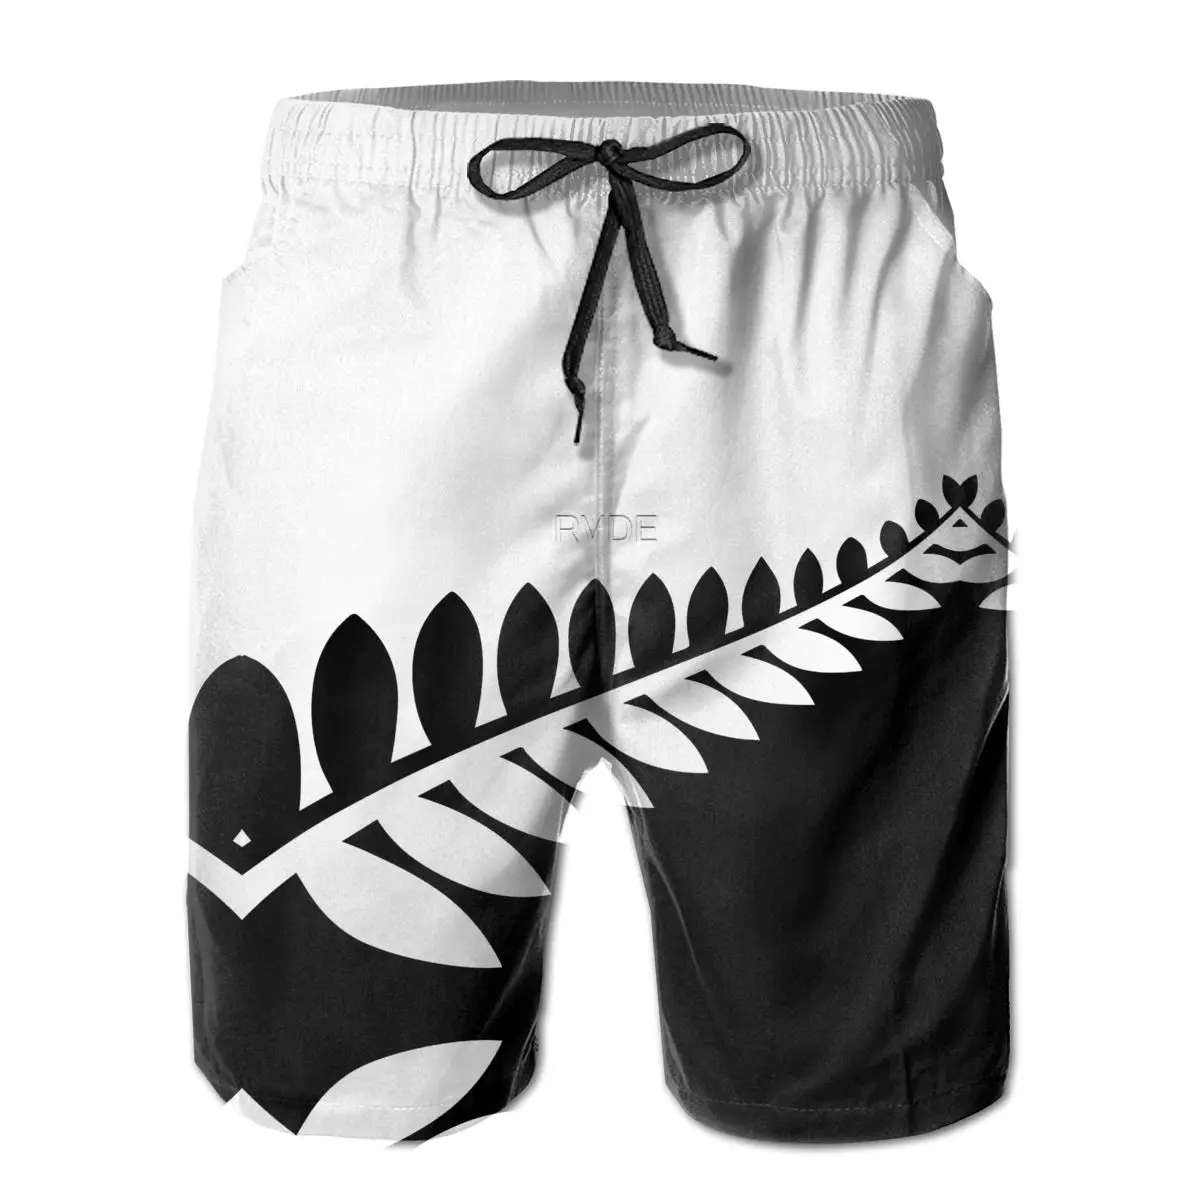 

Hawaii Pants Causal R333 Breathable Quick Dry Humor GraphicLoose New Zealand Black & White Flag